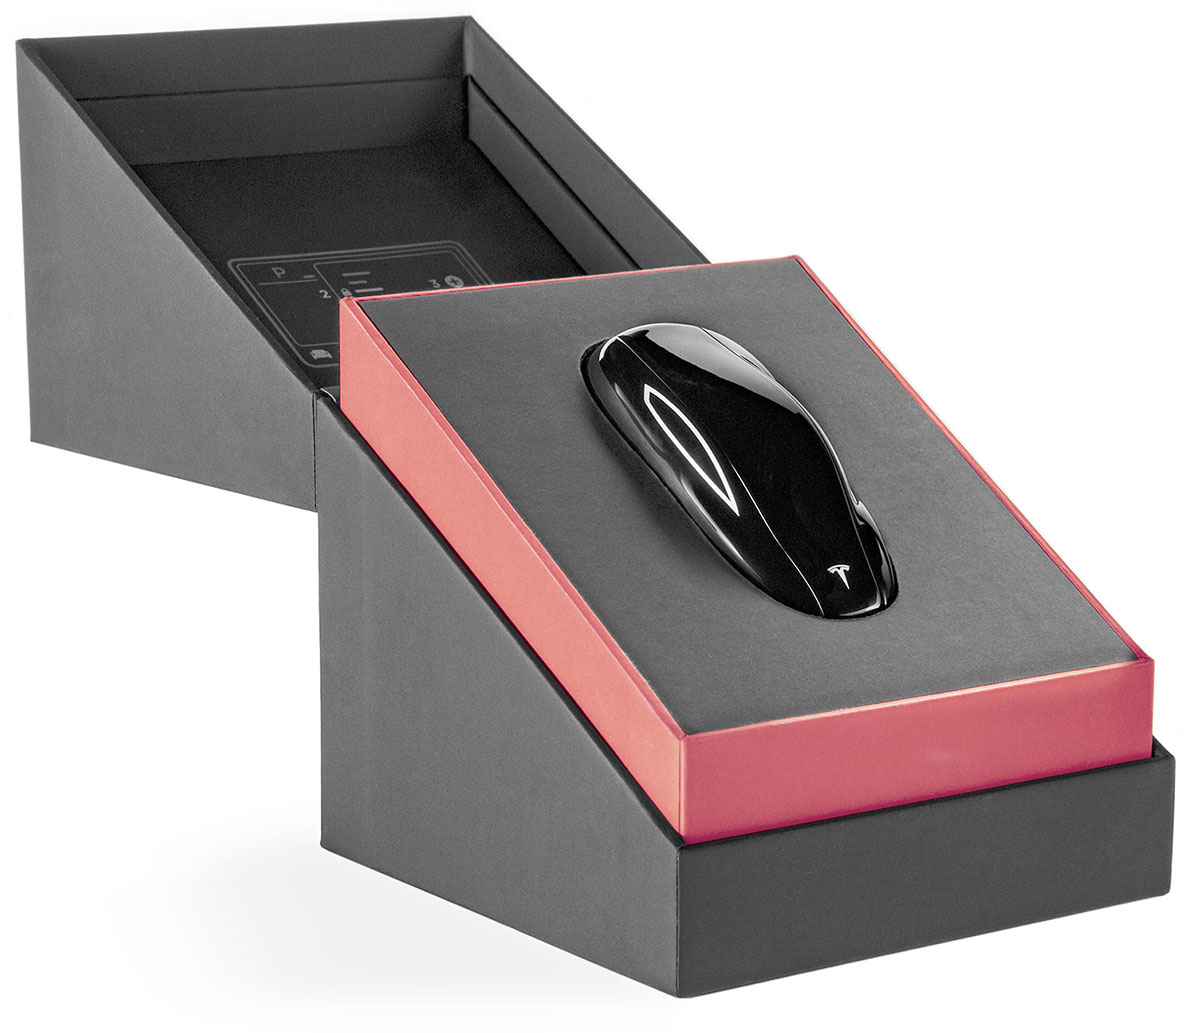 Tesla Model 3 key fob in its beautiful black and red opened box.